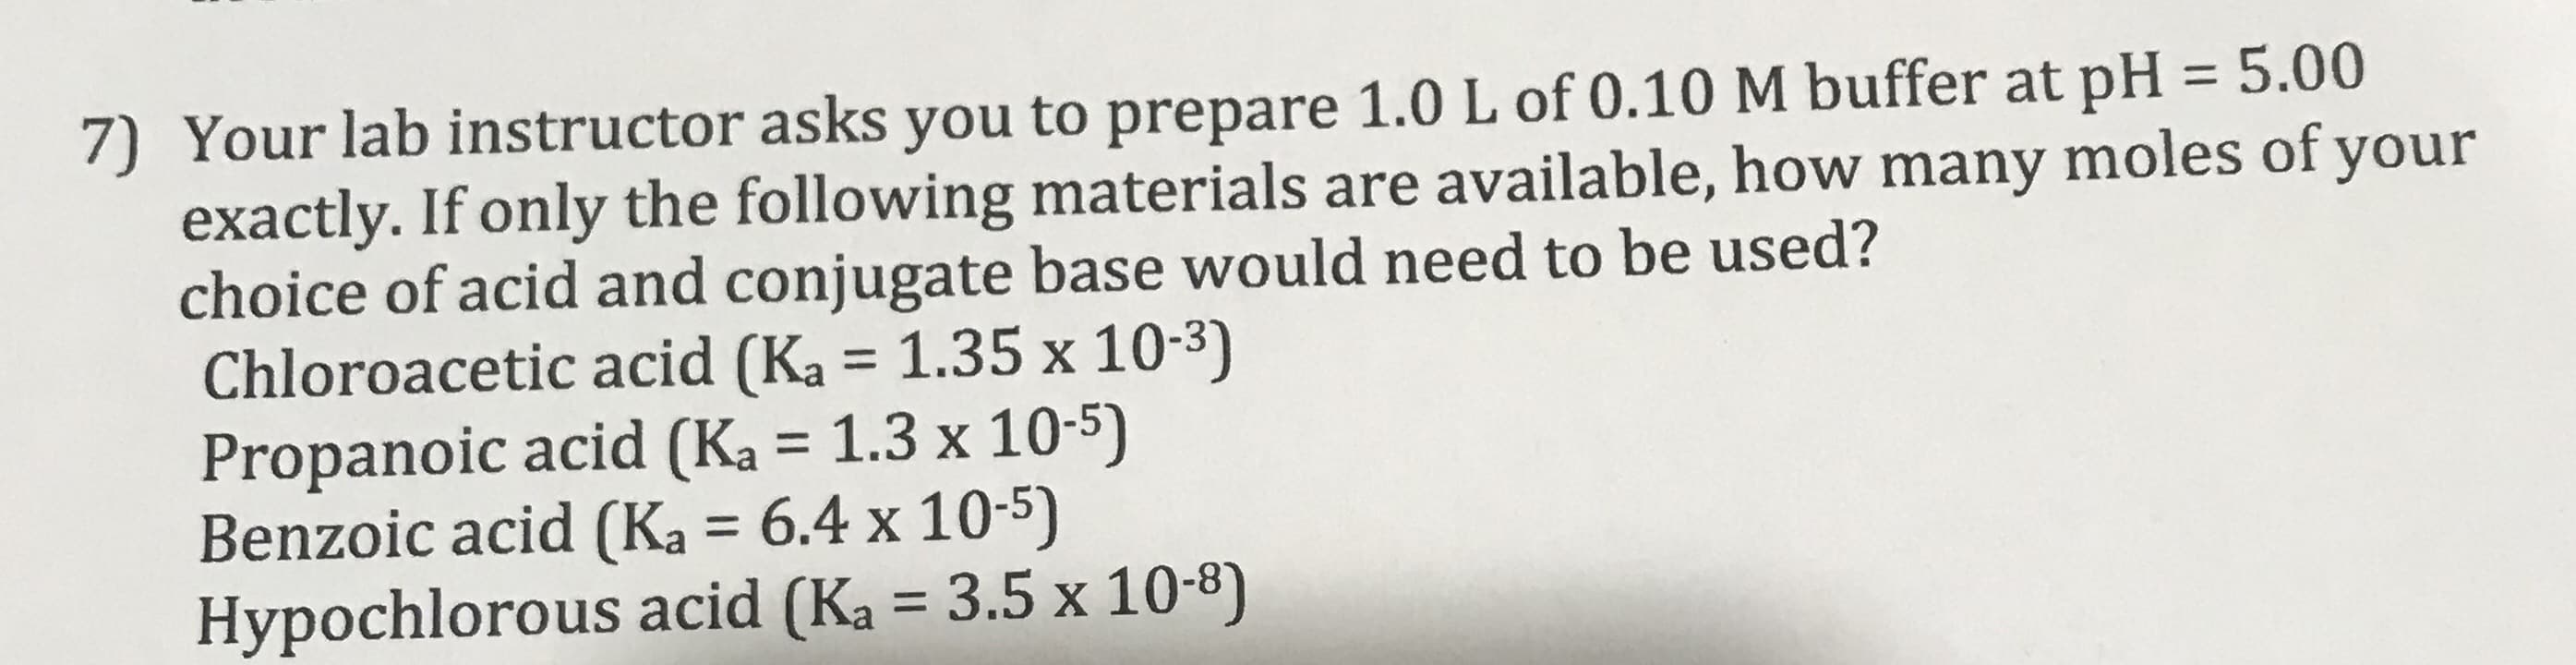 7) Your lab instructor asks you to prepare 1.0 L of 0.10M buffer at pH = 5.00
exactly. If only the following materials are available, how many moles of your
choice of acid and conjugate base would need to be used?
Chloroacetic acid (Ka = 1.35 x 10-3)
Propanoic acid (Ka = 1.3 x 10-5)
Benzoic acid (Ka = 6.4 x 10-5)
Hypochlorous acid (Ka = 3.5 x 10-8)
%3|
%3D
%3D
%3D
